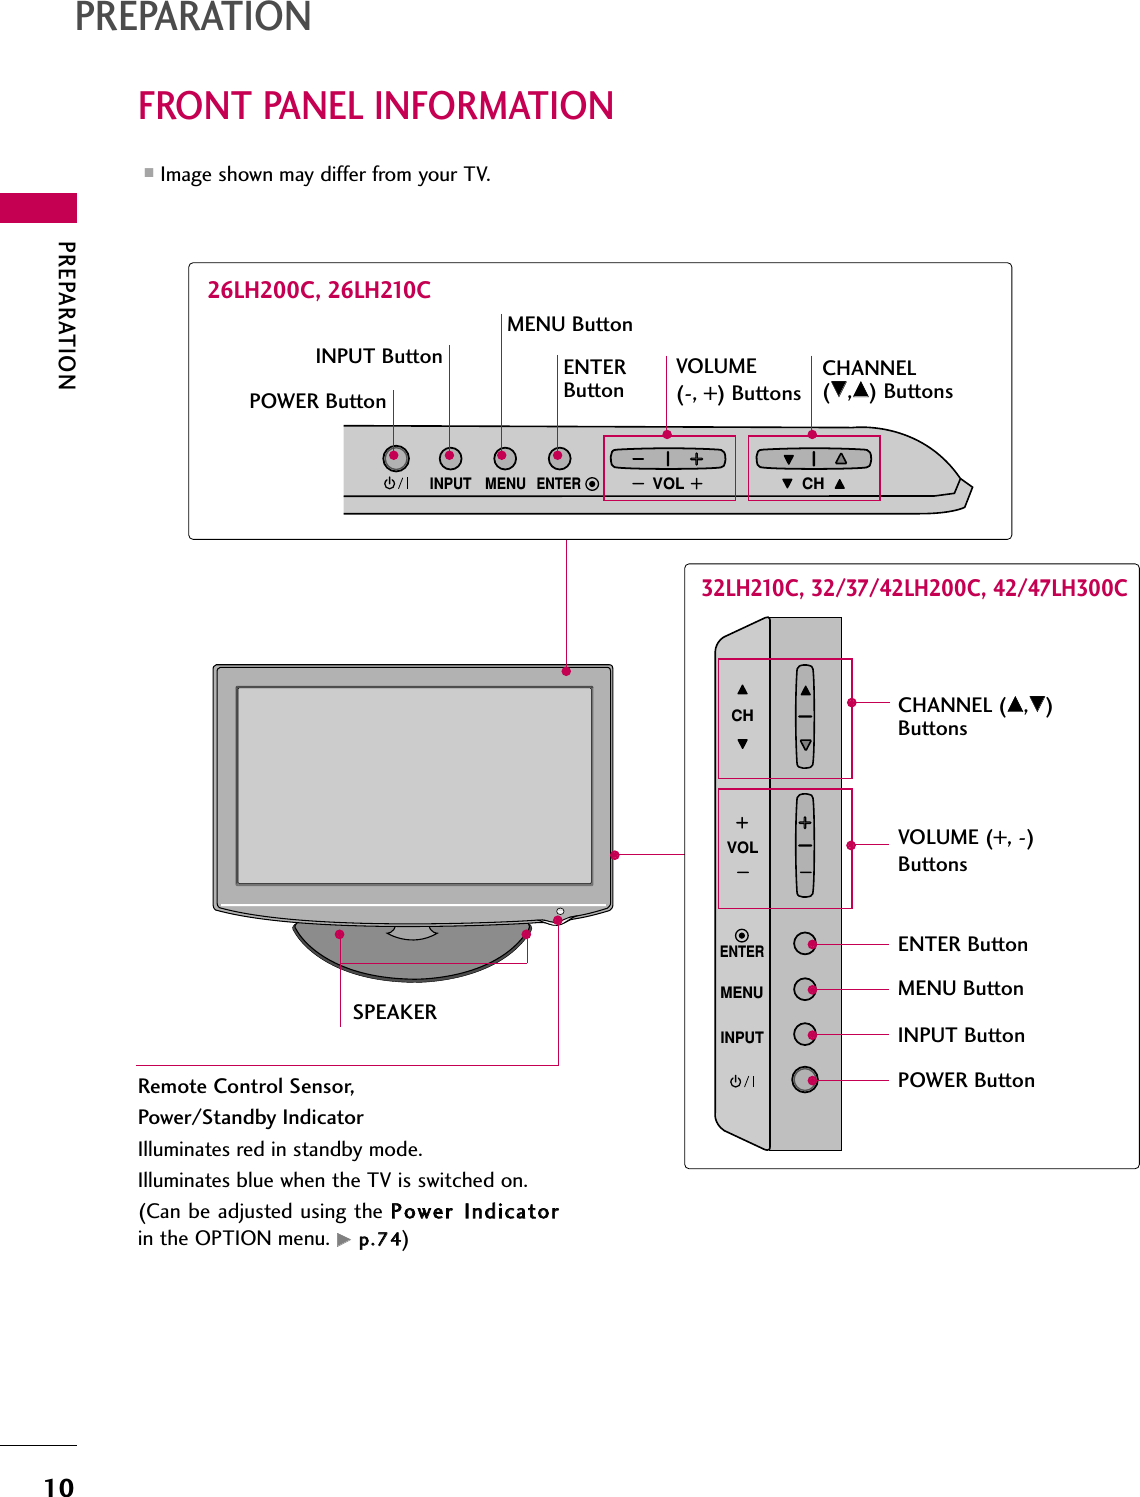 PREPARATION10FRONT PANEL INFORMATIONPREPARATION■Image shown may differ from your TV.INPUT MENUVOL CHENTERCHANNEL(EE,DD) ButtonsVOLUME (-, +) ButtonsENTERButton26LH200C, 26LH210CMENU ButtonPOWER ButtonINPUT ButtonSPEAKERRemote Control Sensor,Power/Standby IndicatorIlluminates red in standby mode.Illuminates blue when the TV is switched on.(Can be adjusted using the PPoowweerr  IInnddiiccaattoorrin the OPTION menu. GGpp..7744)32LH210C, 32/37/42LH200C, 42/47LH300CINPUTMENUENTERCHVOLCHANNEL (DD,EE)ButtonsVOLUME (+, -) ButtonsENTER ButtonMENU ButtonINPUT ButtonPOWER Button